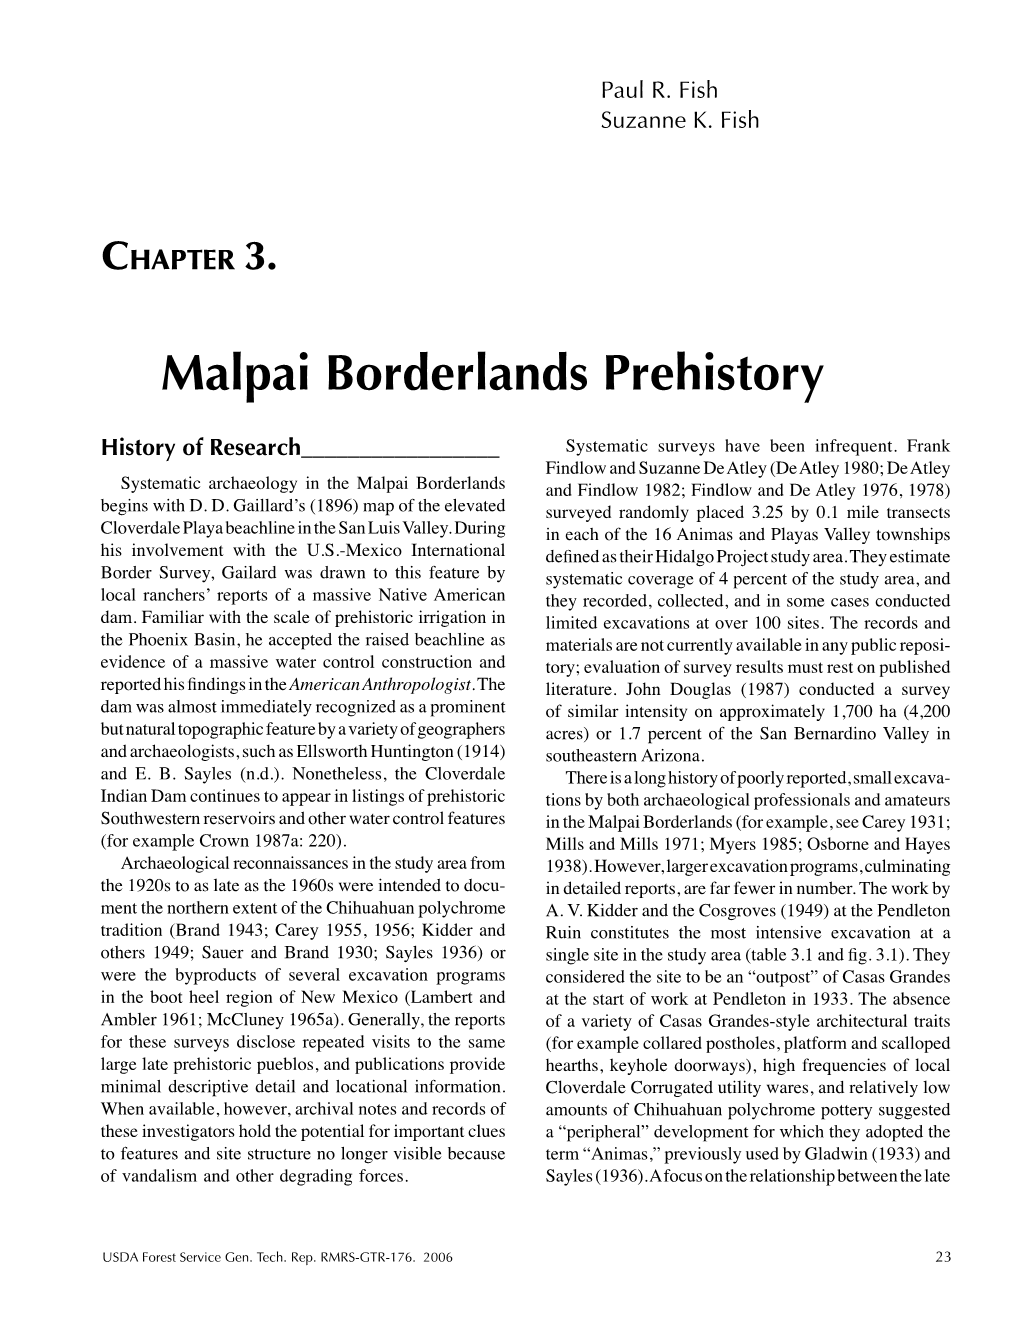 Prehistory and Early History of the Malpai Borderlands: Archaeological